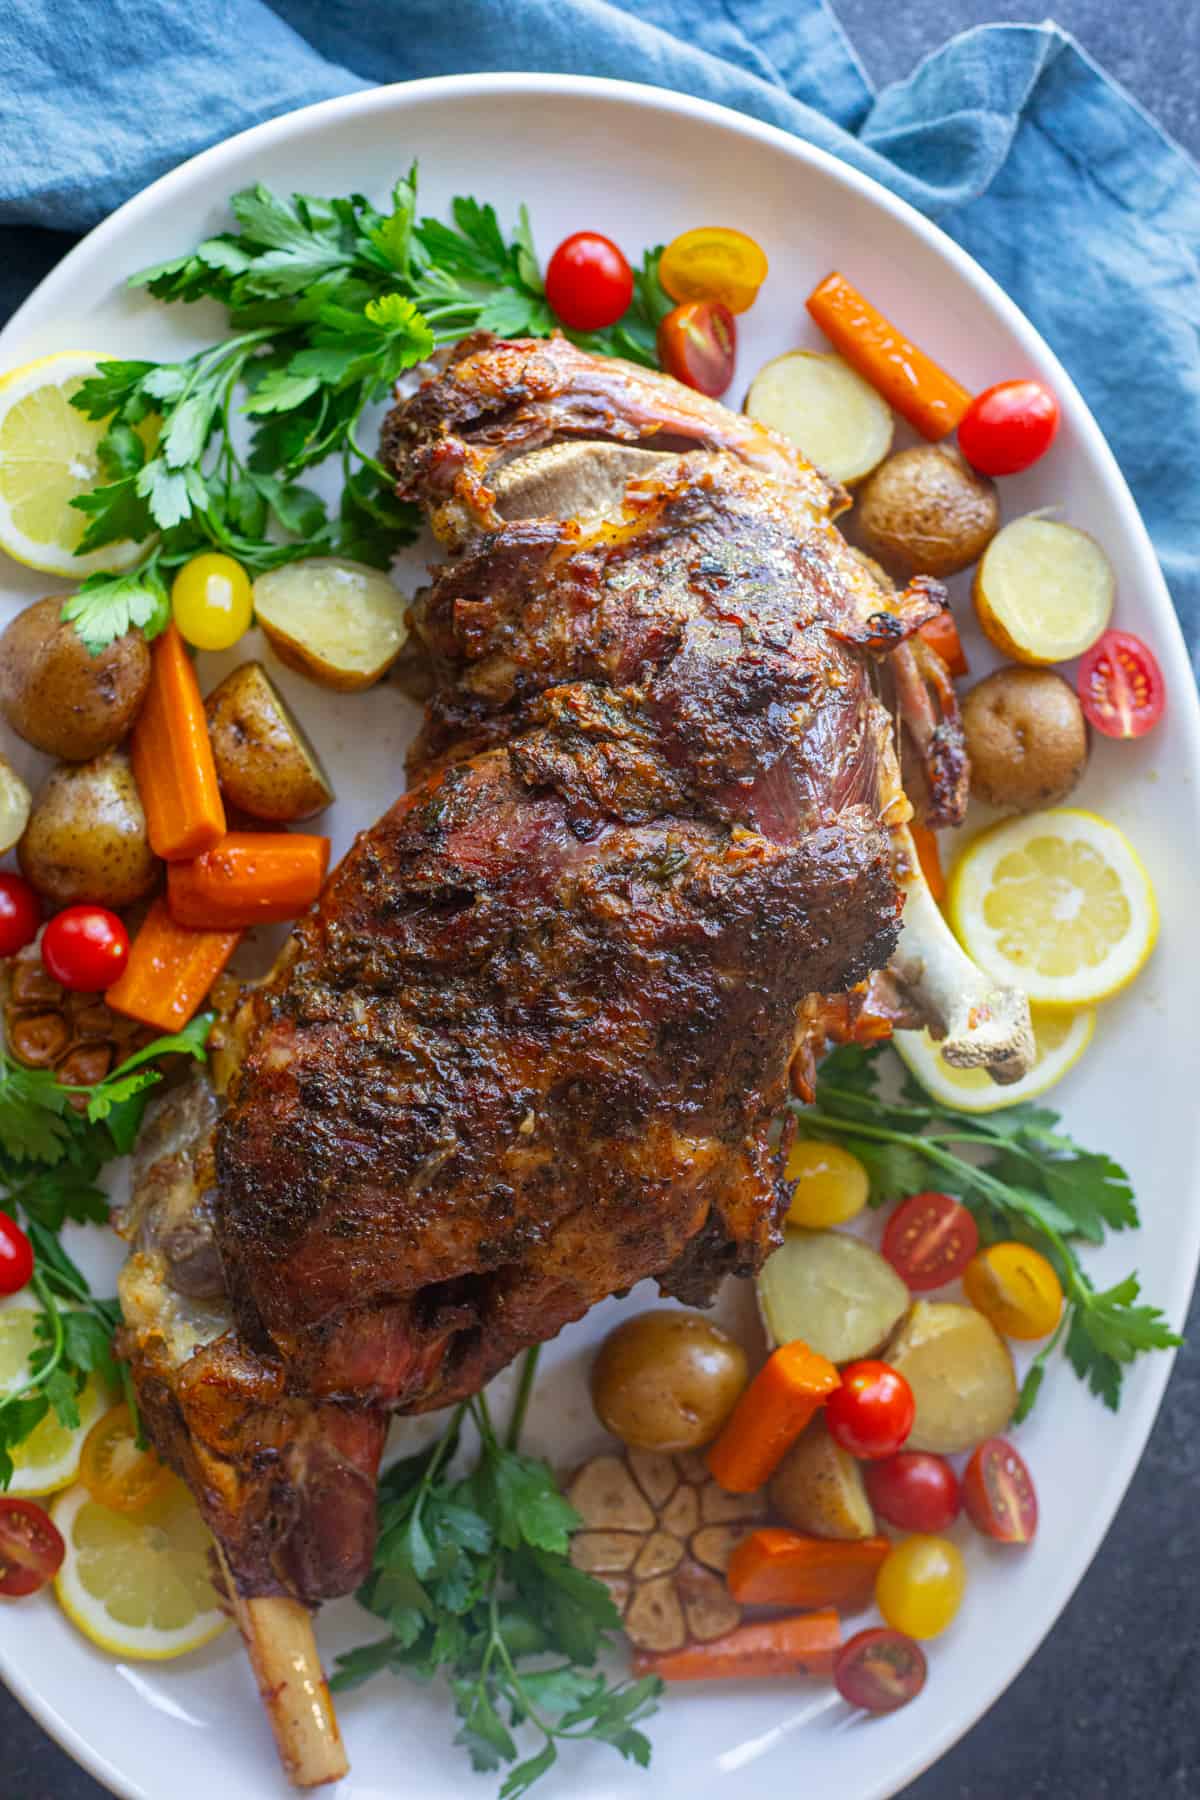 Slow roasted leg of lamb on a platter with vegetables.